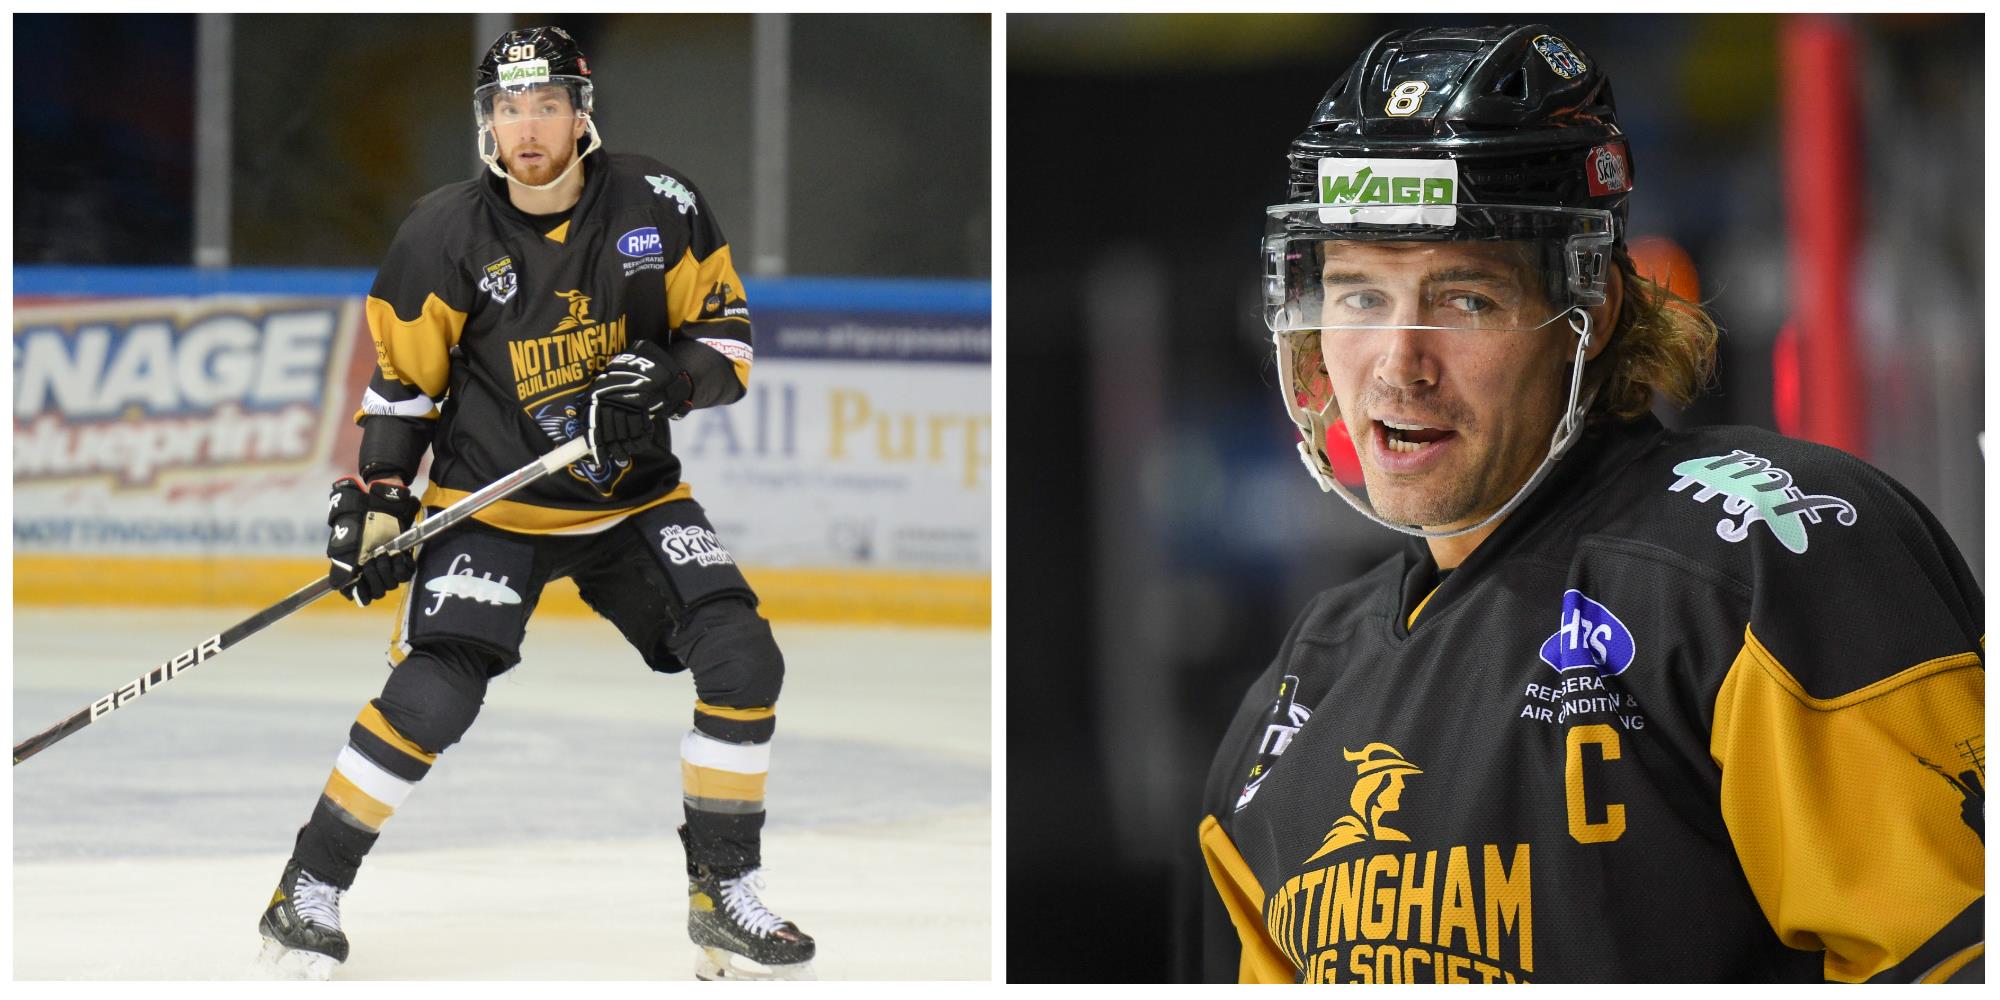 HAMMOND AND MYERS NAMED IN GB SQUAD Top Image